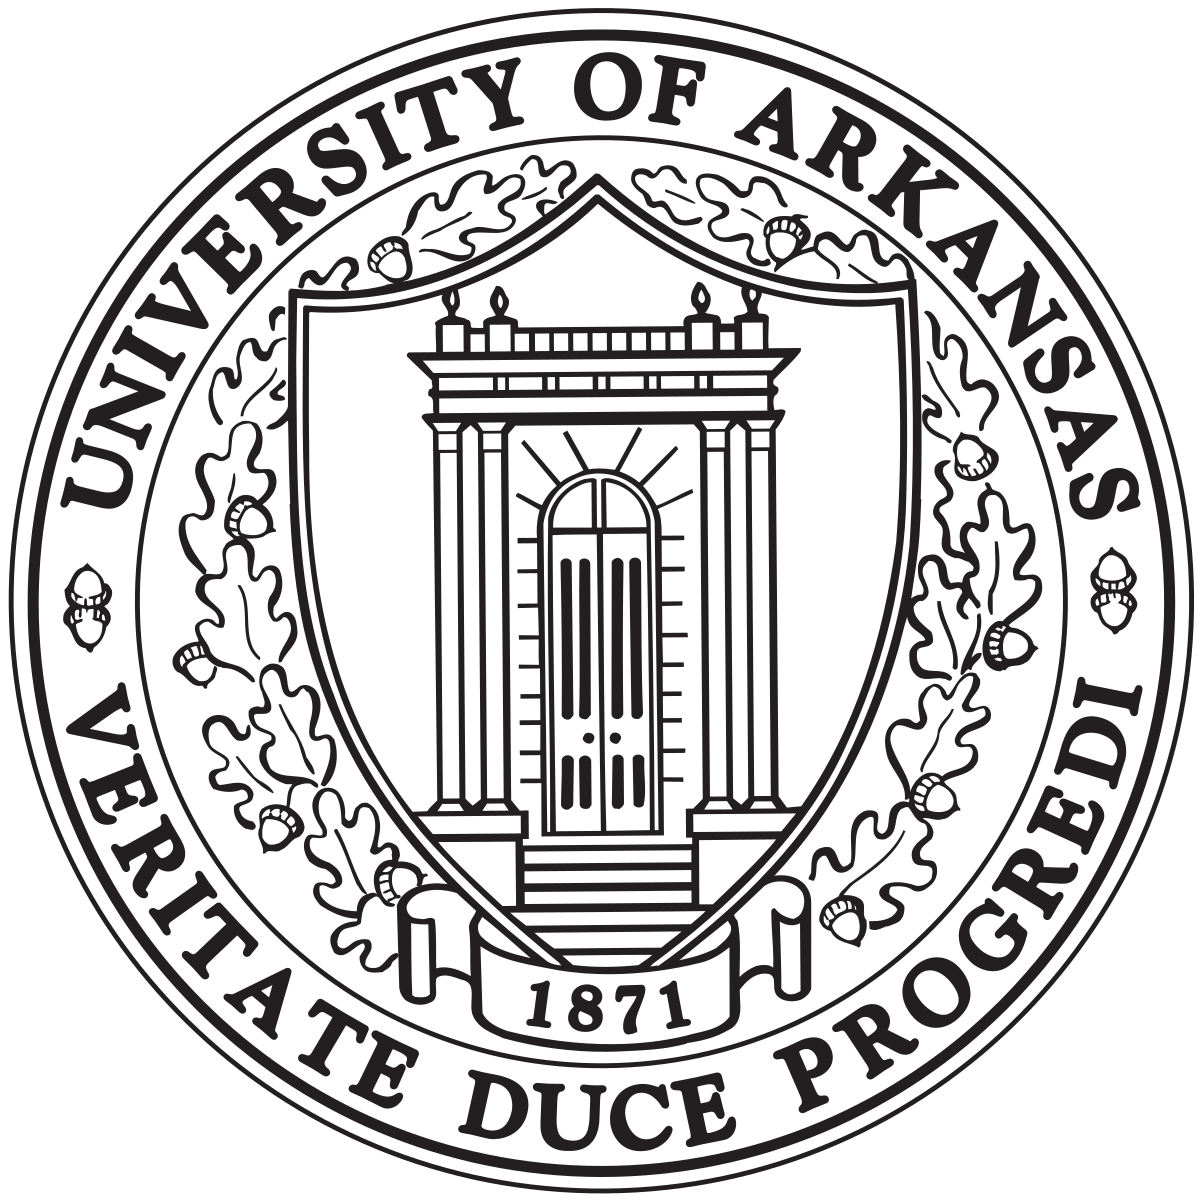 University of Arkansas – 30 Most Affordable Online Master’s in Food Science and Nutrition 2020